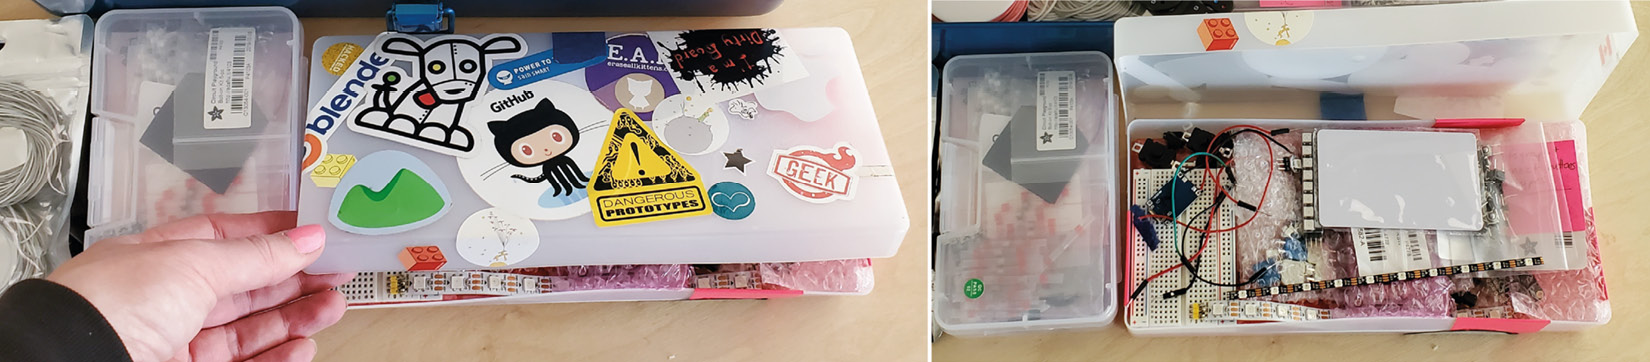 Figure 14.4 – Using storage solutions from Proto-Pic packaging (right) and another component box (left)
